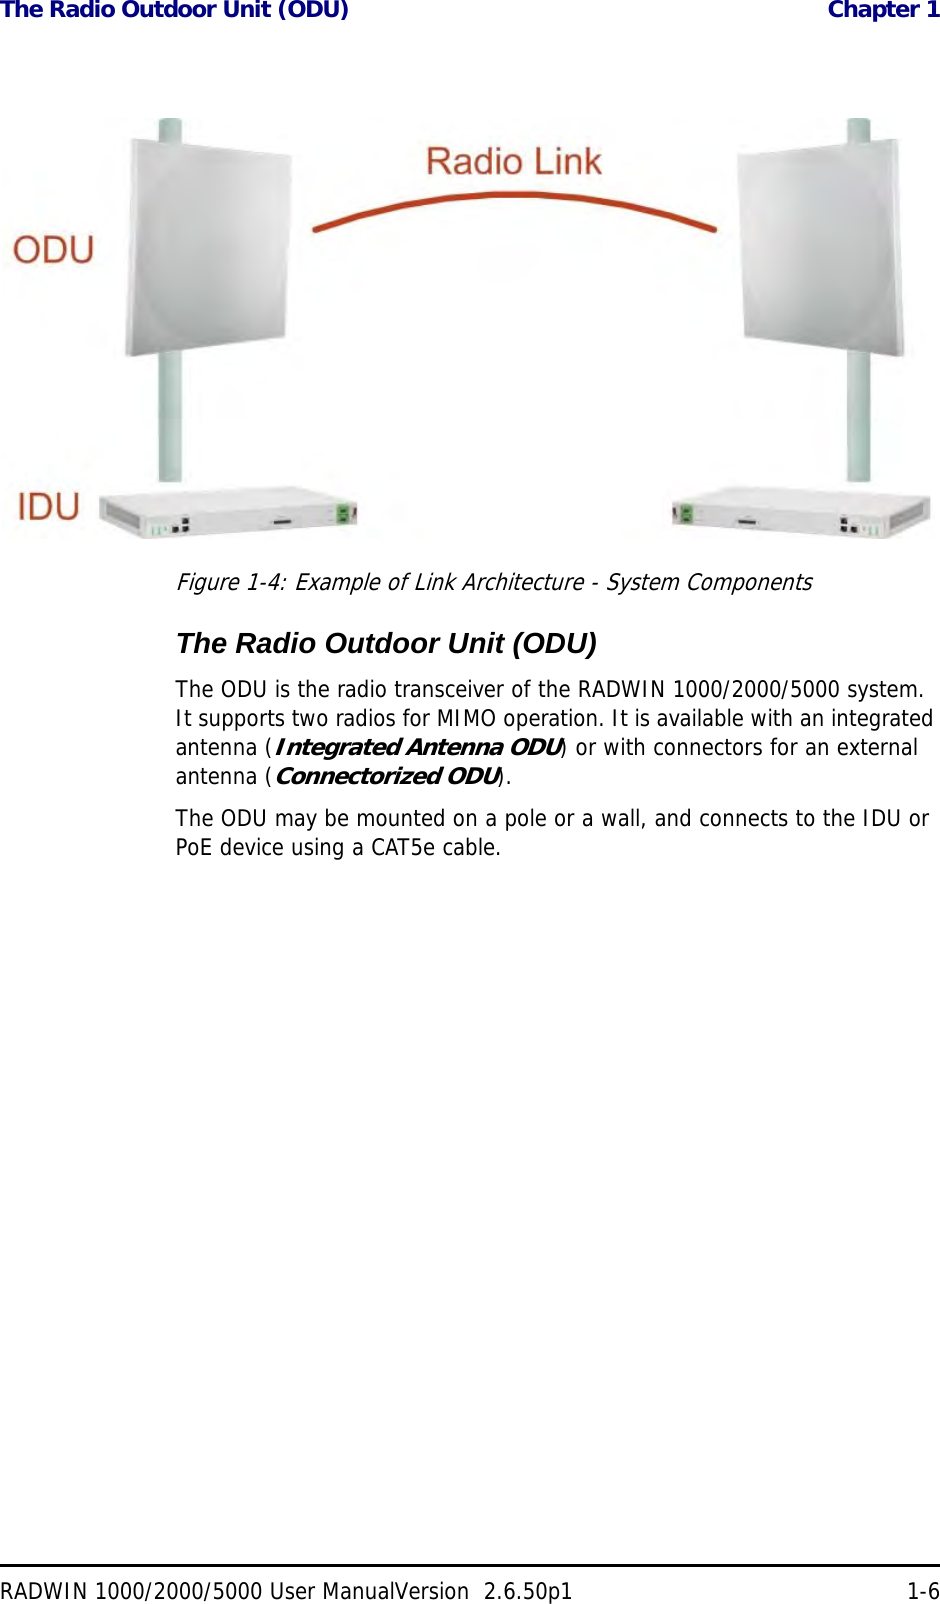 The Radio Outdoor Unit (ODU)  Chapter 1RADWIN 1000/2000/5000 User ManualVersion  2.6.50p1 1-6Figure 1-4: Example of Link Architecture - System ComponentsThe Radio Outdoor Unit (ODU)The ODU is the radio transceiver of the RADWIN 1000/2000/5000 system. It supports two radios for MIMO operation. It is available with an integrated antenna (Integrated Antenna ODU) or with connectors for an external antenna (Connectorized ODU).The ODU may be mounted on a pole or a wall, and connects to the IDU or PoE device using a CAT5e cable.